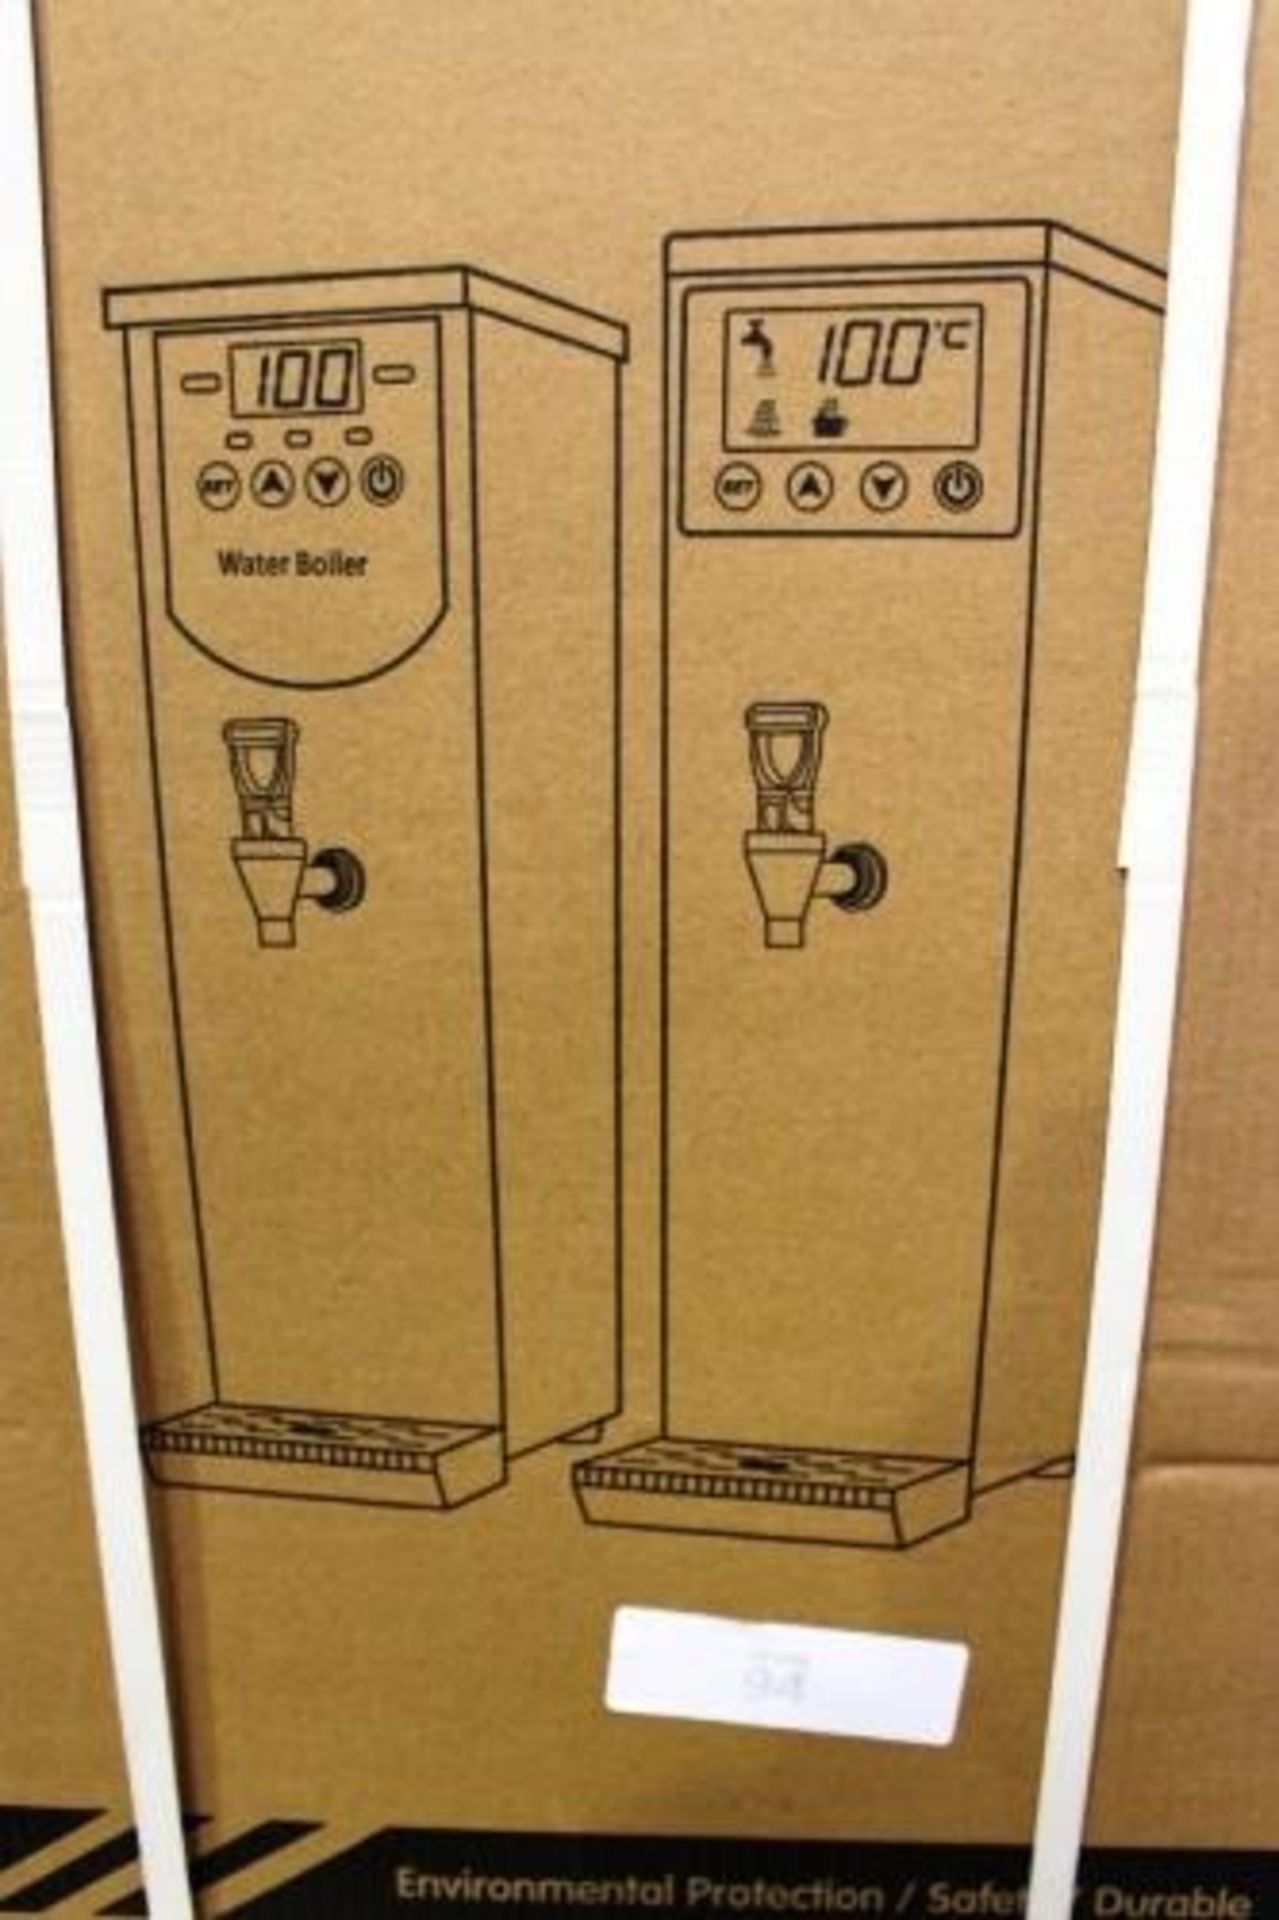 1 x commercial water boiler, size 440 x 280 x 730mm - Sealed new in box (ES9)